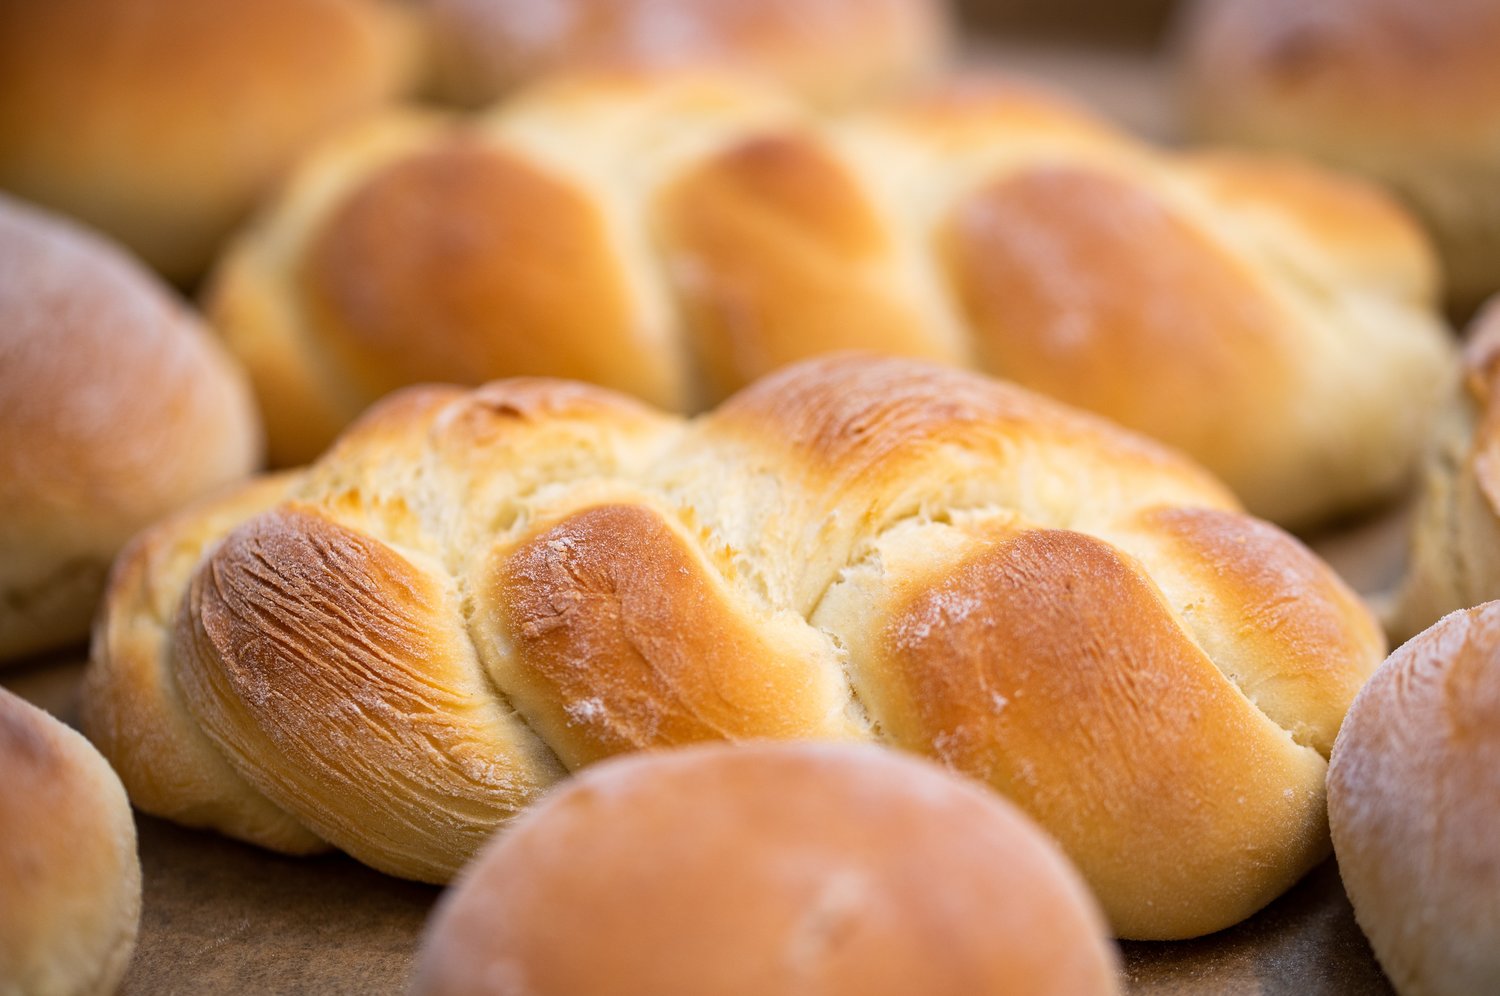 Challah is also a frequent fixture of Rosh Hashana celebrations, as “the circular shape of the loaf symbolizes the circle of life.”